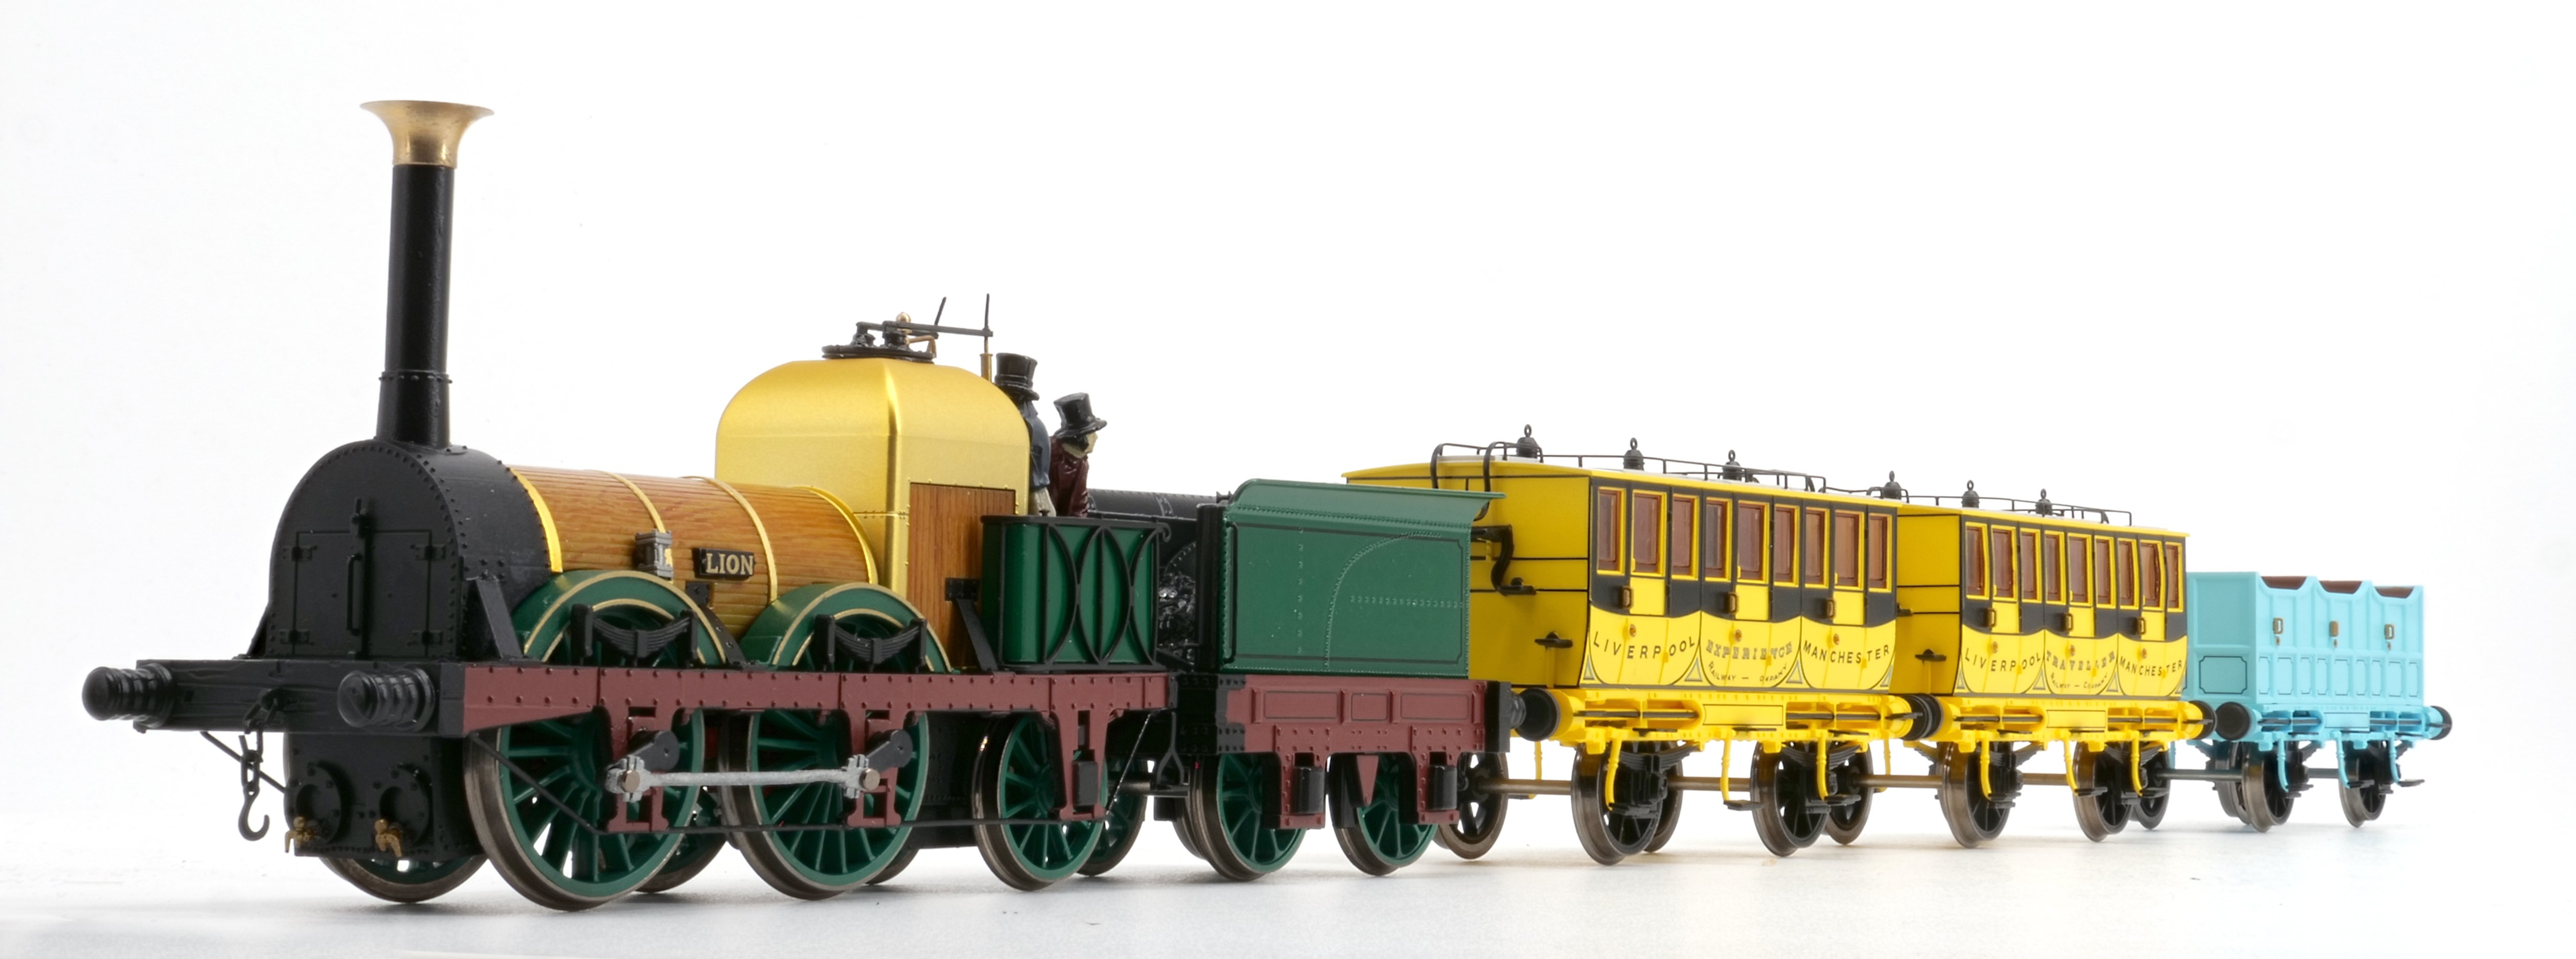 Hornby’s latest Liverpool and Manchester Railway (LMR) centenary train pack containing LMR 0-4-2 Lion